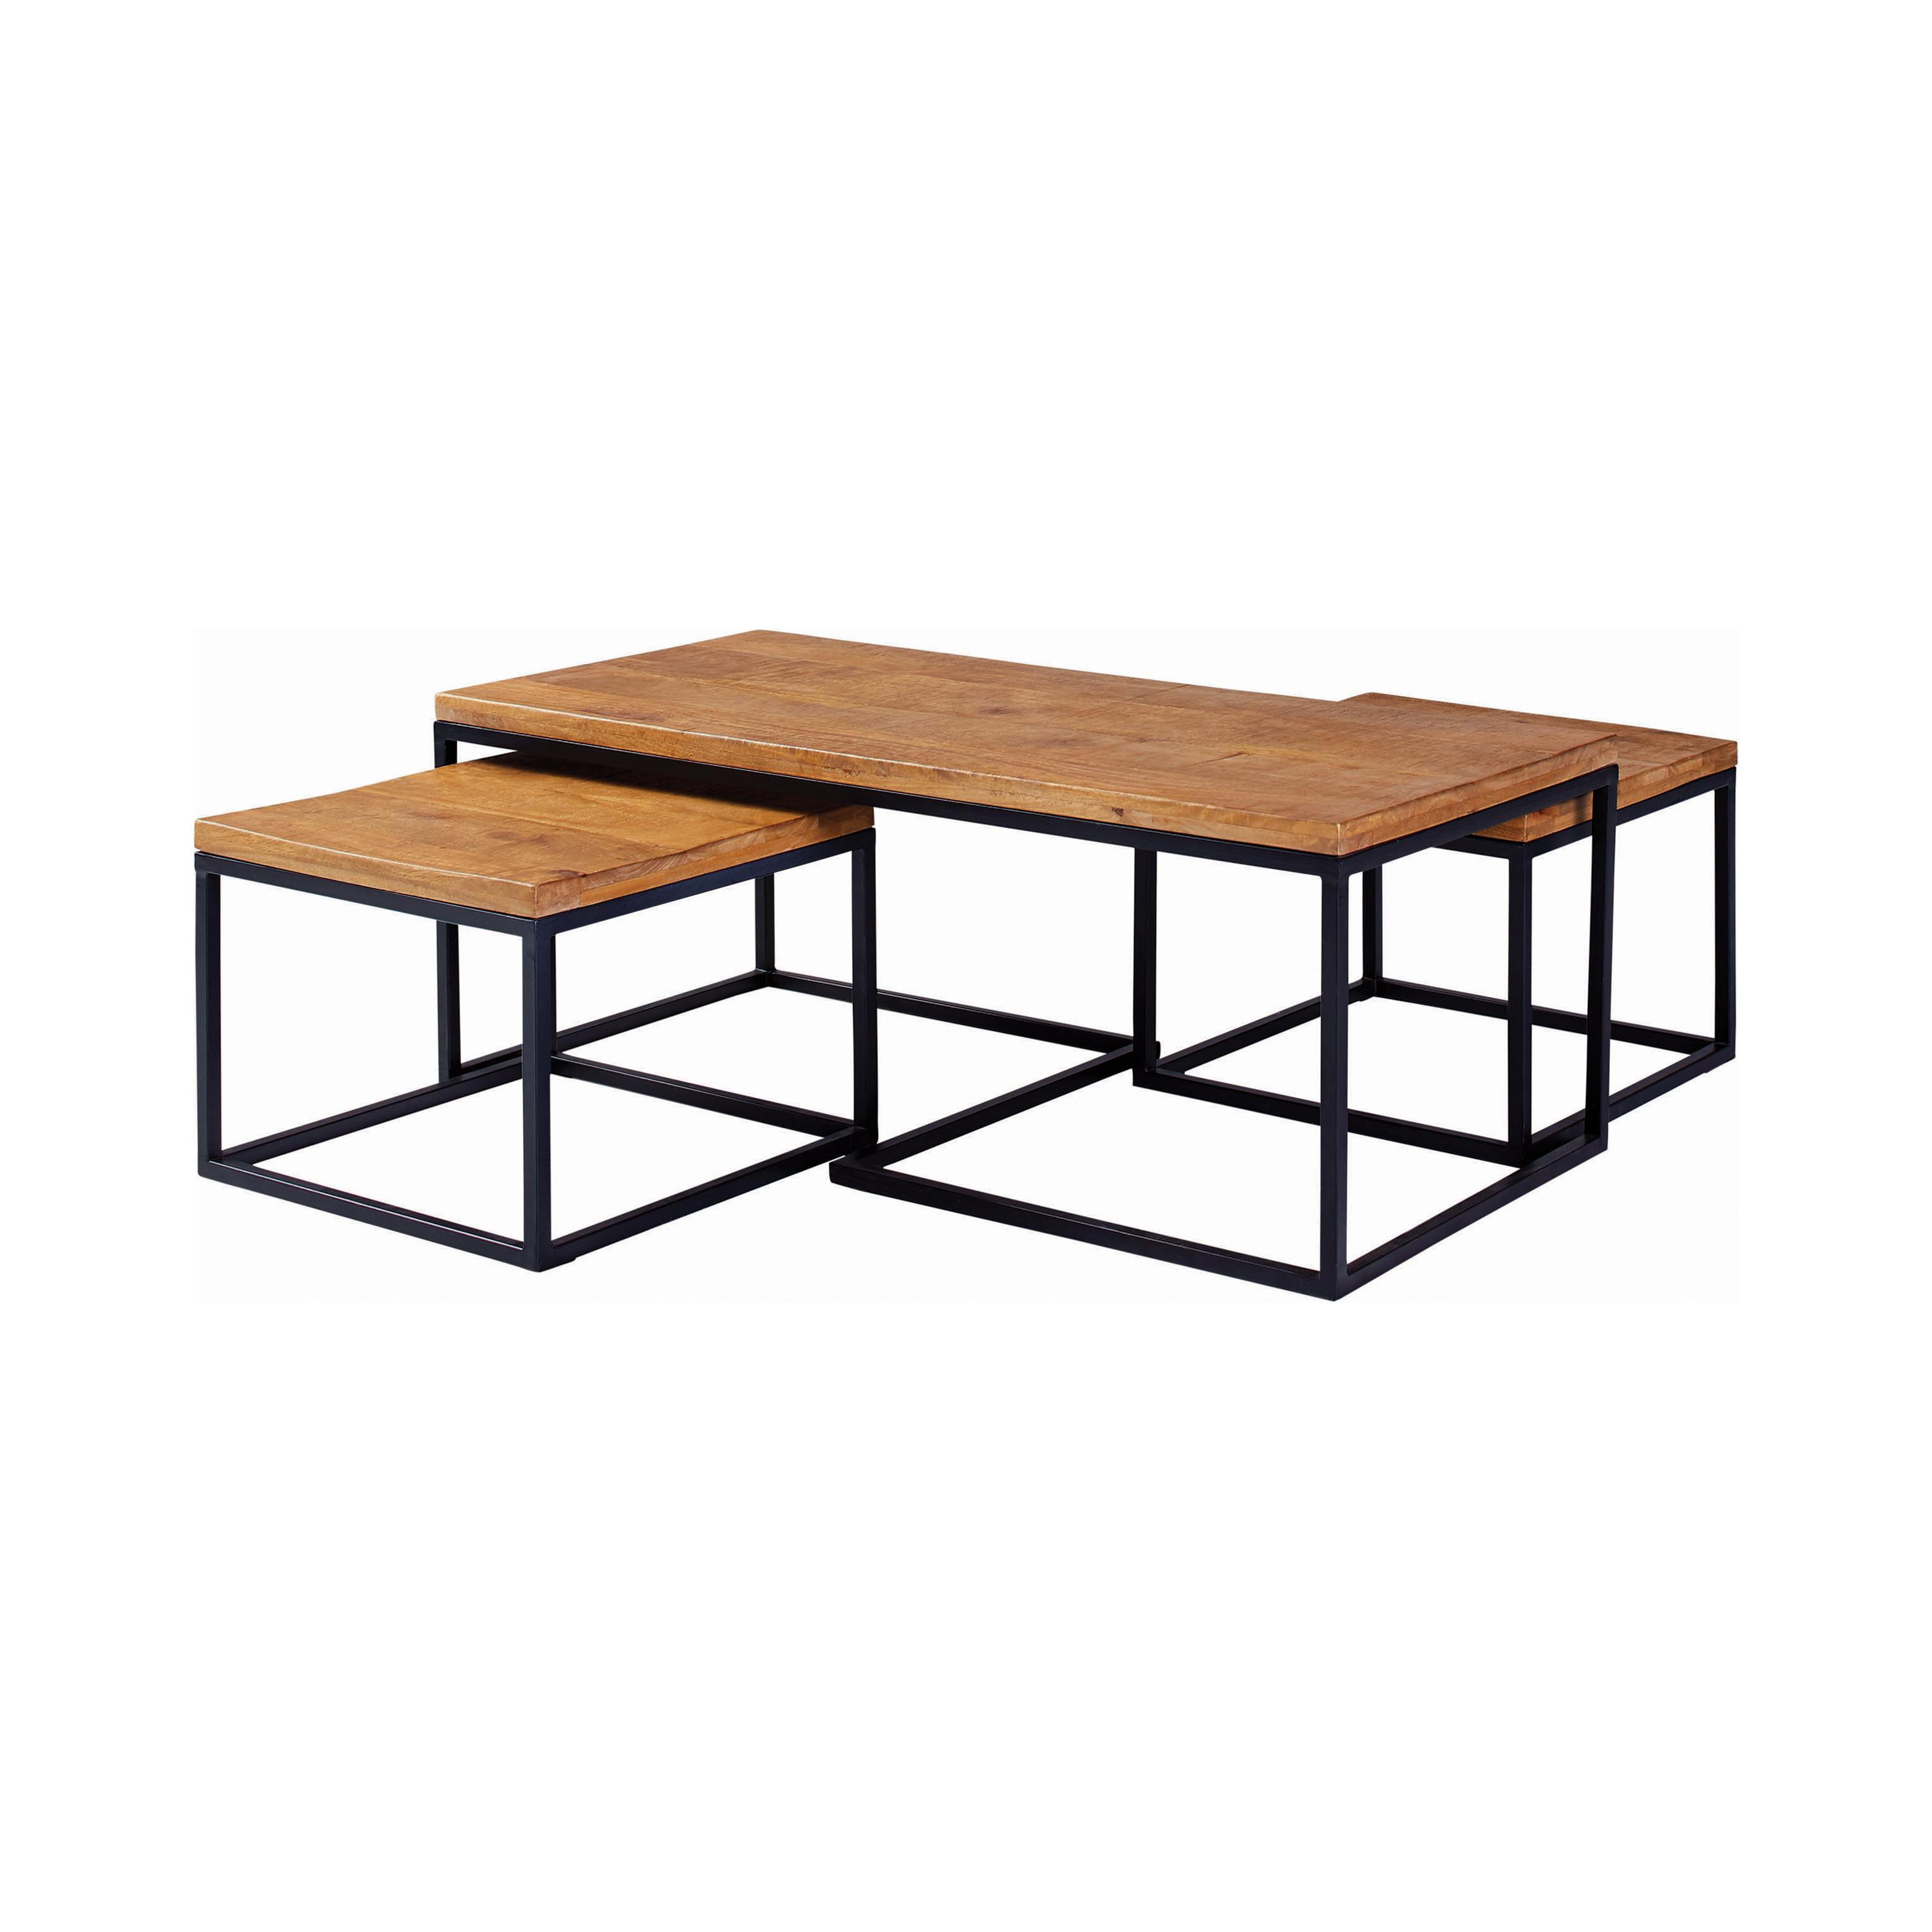 Modern Coffee Table Set 731193 731193 in Natural 